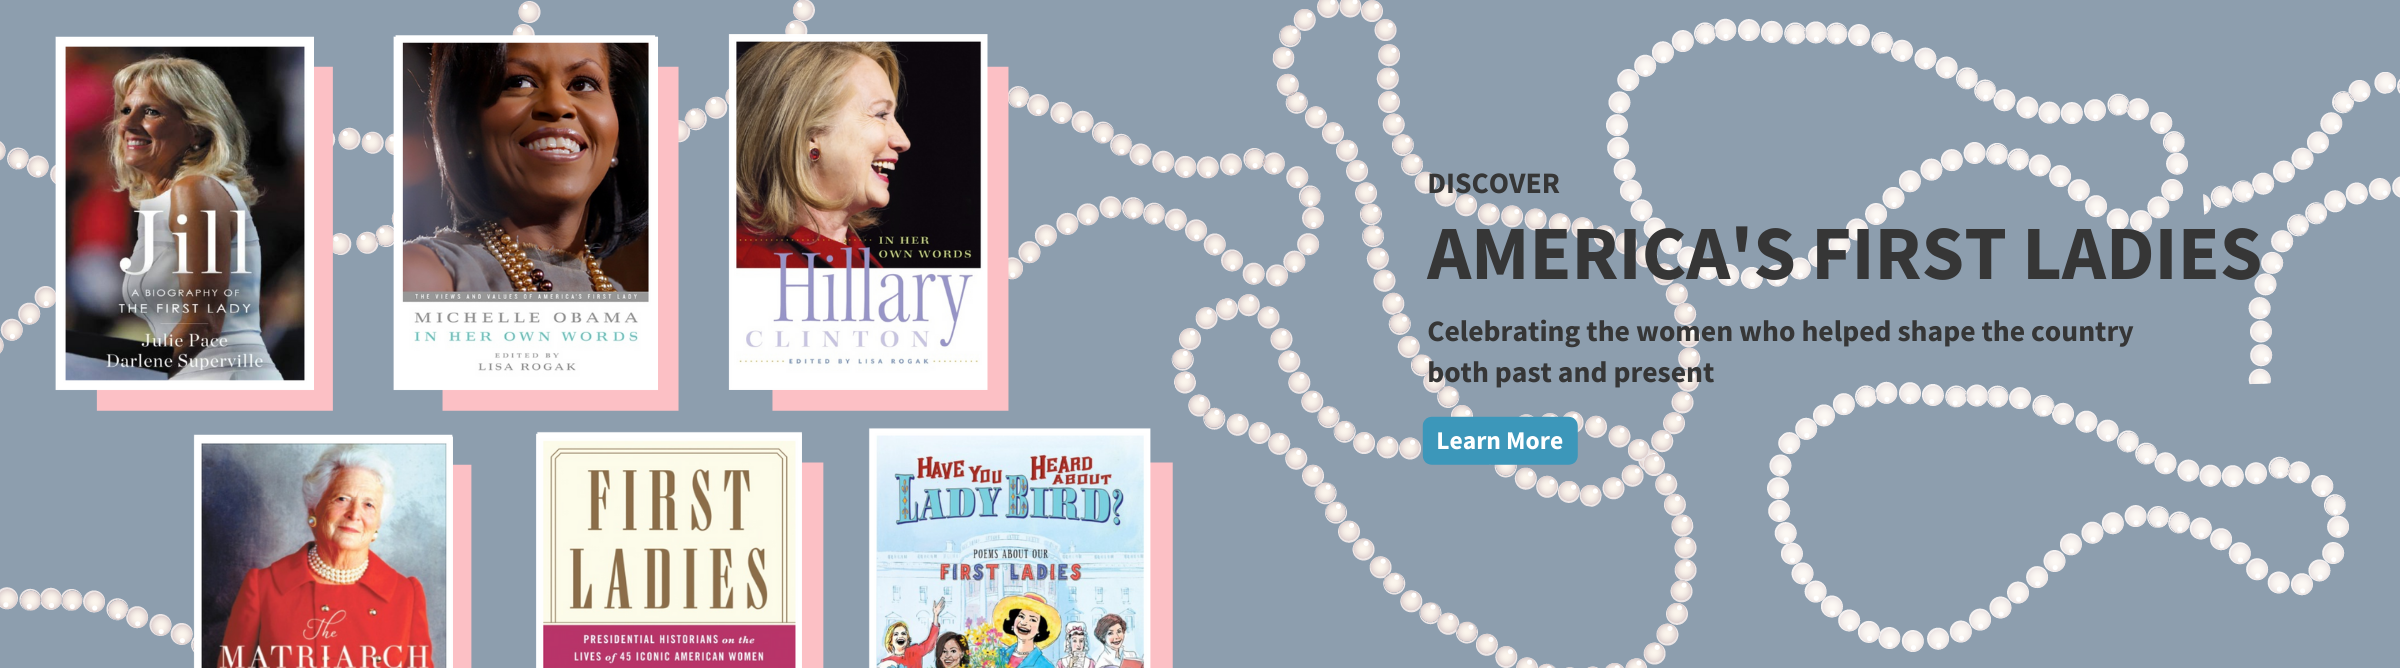 Discover America's First Ladies. Celebrating the women who helped change the country both past and present.